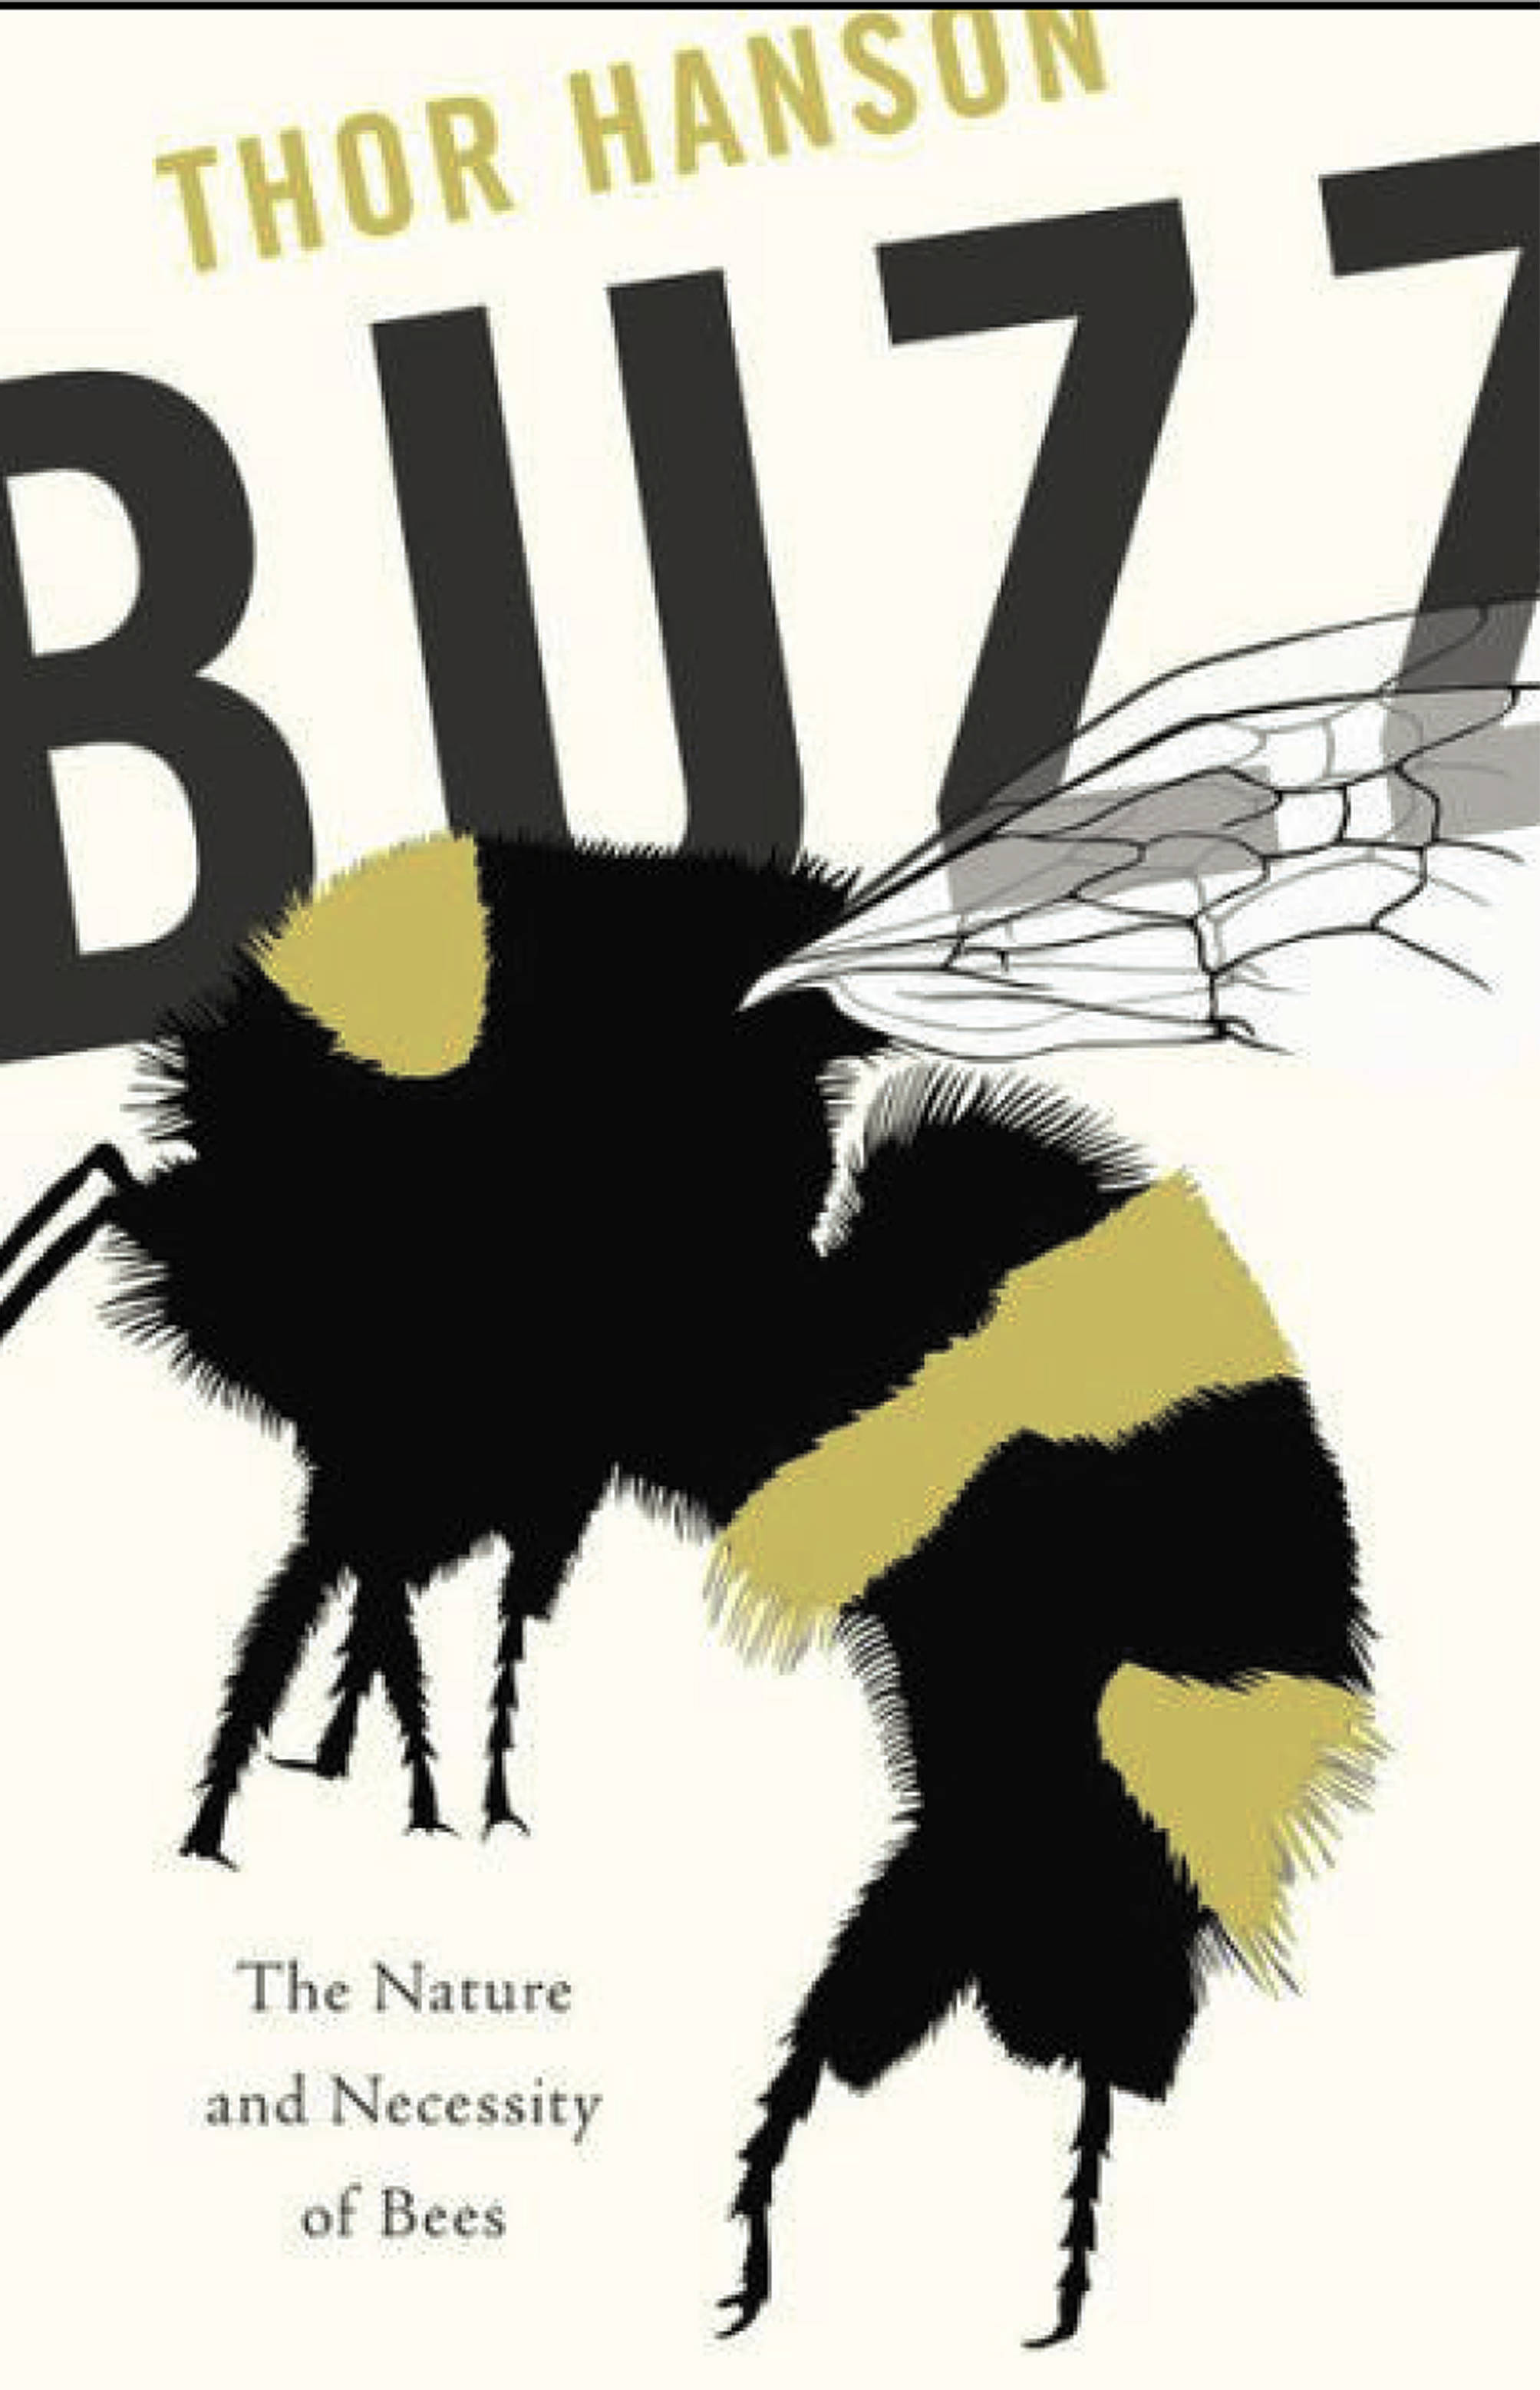 Thor Hanson releases new book “Buzz: The Nature and Necessity of Bees”